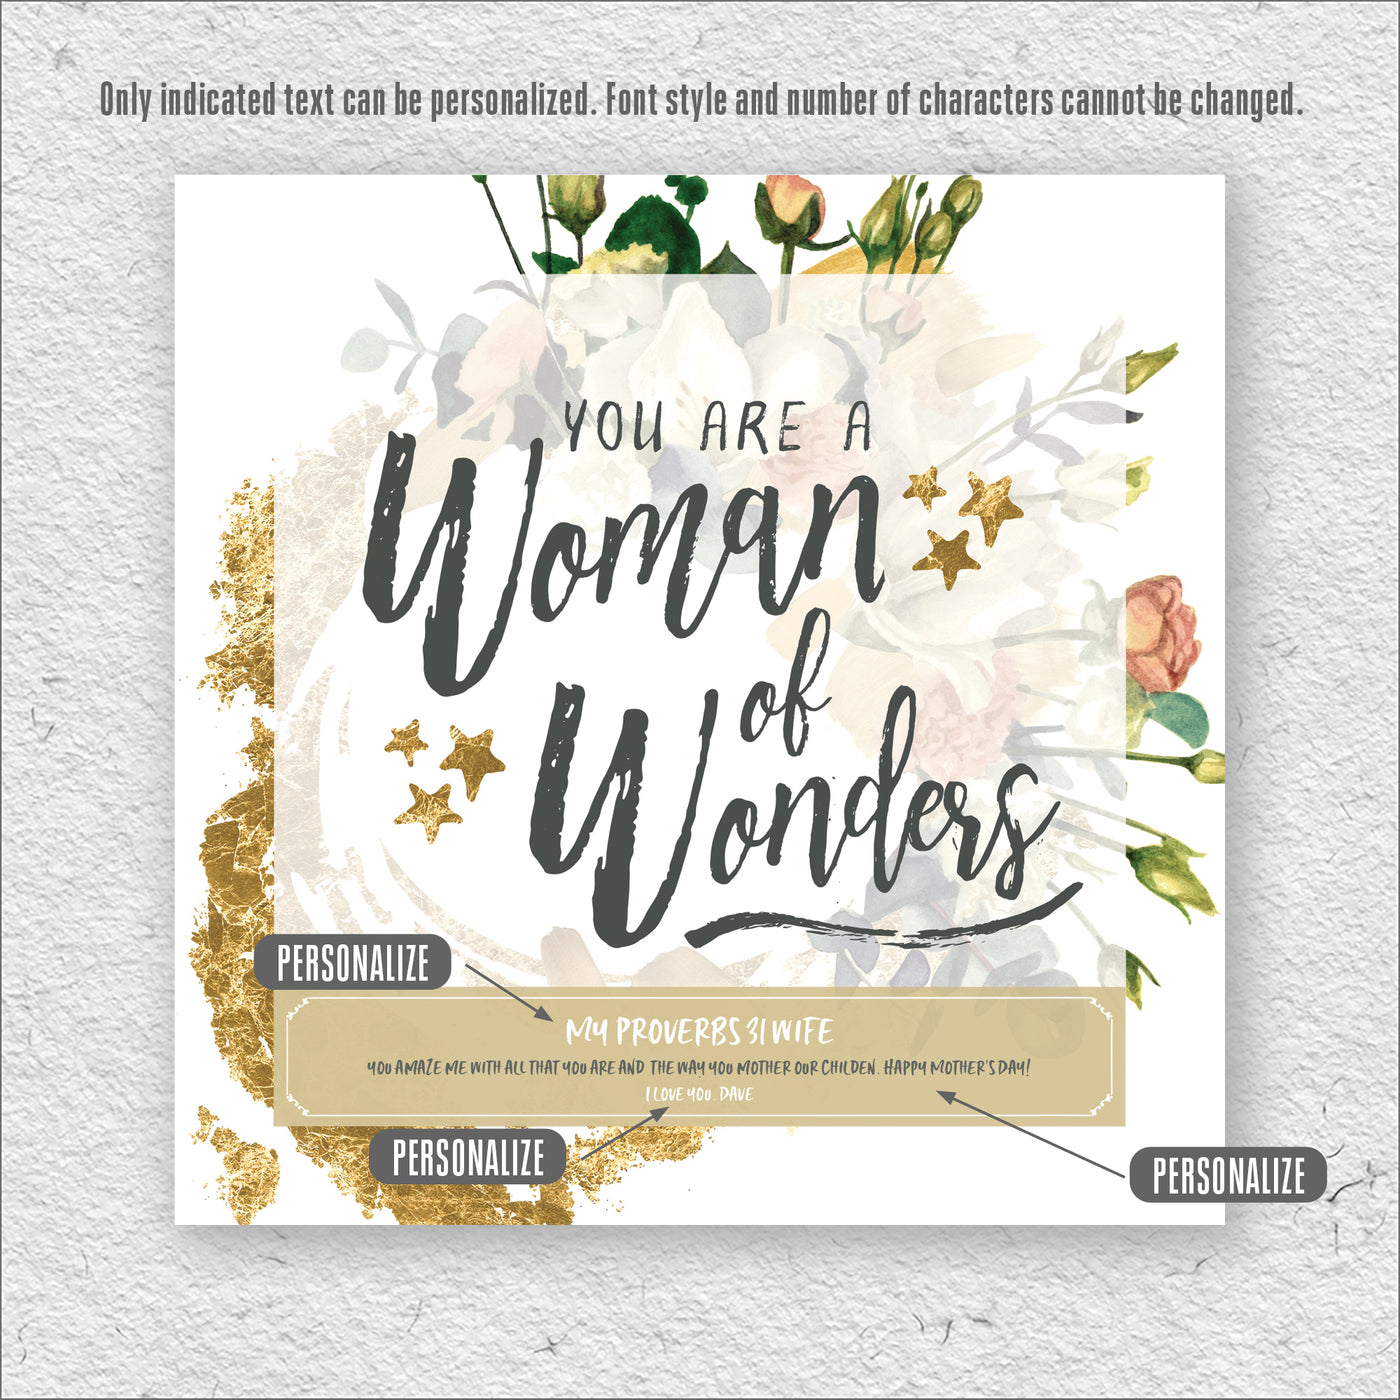 Woman of Wonders | Personalized Mom Wife Sister Friend Mother's Day Birthday Print, Wall Decor